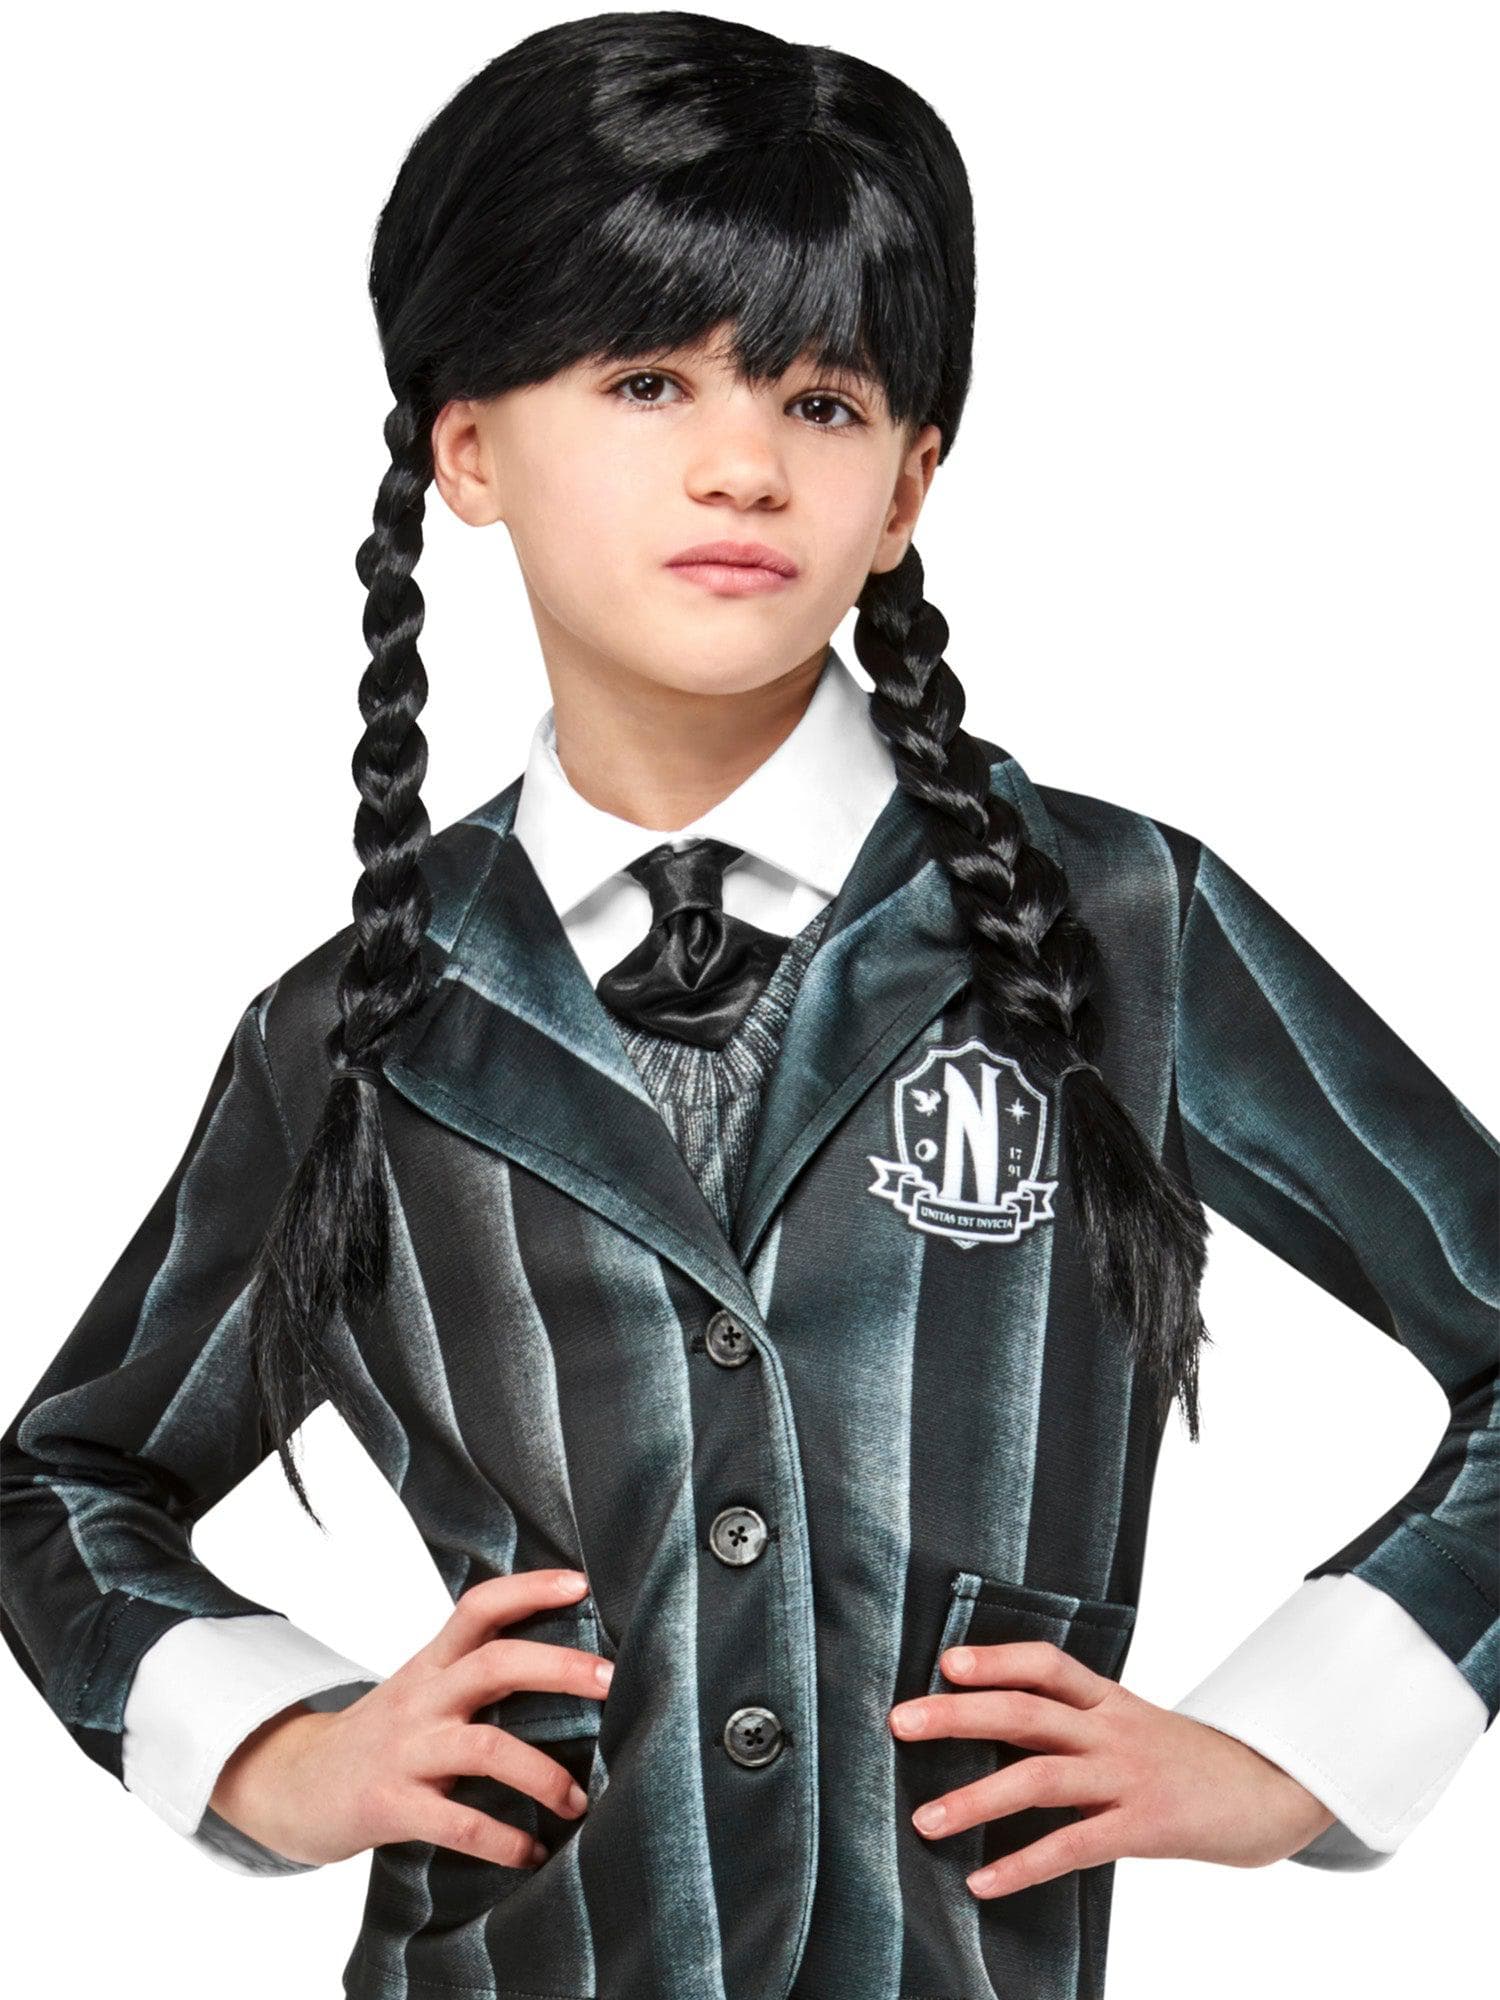 Wednesday Addams Nevermore Academy Costumes and Accessories